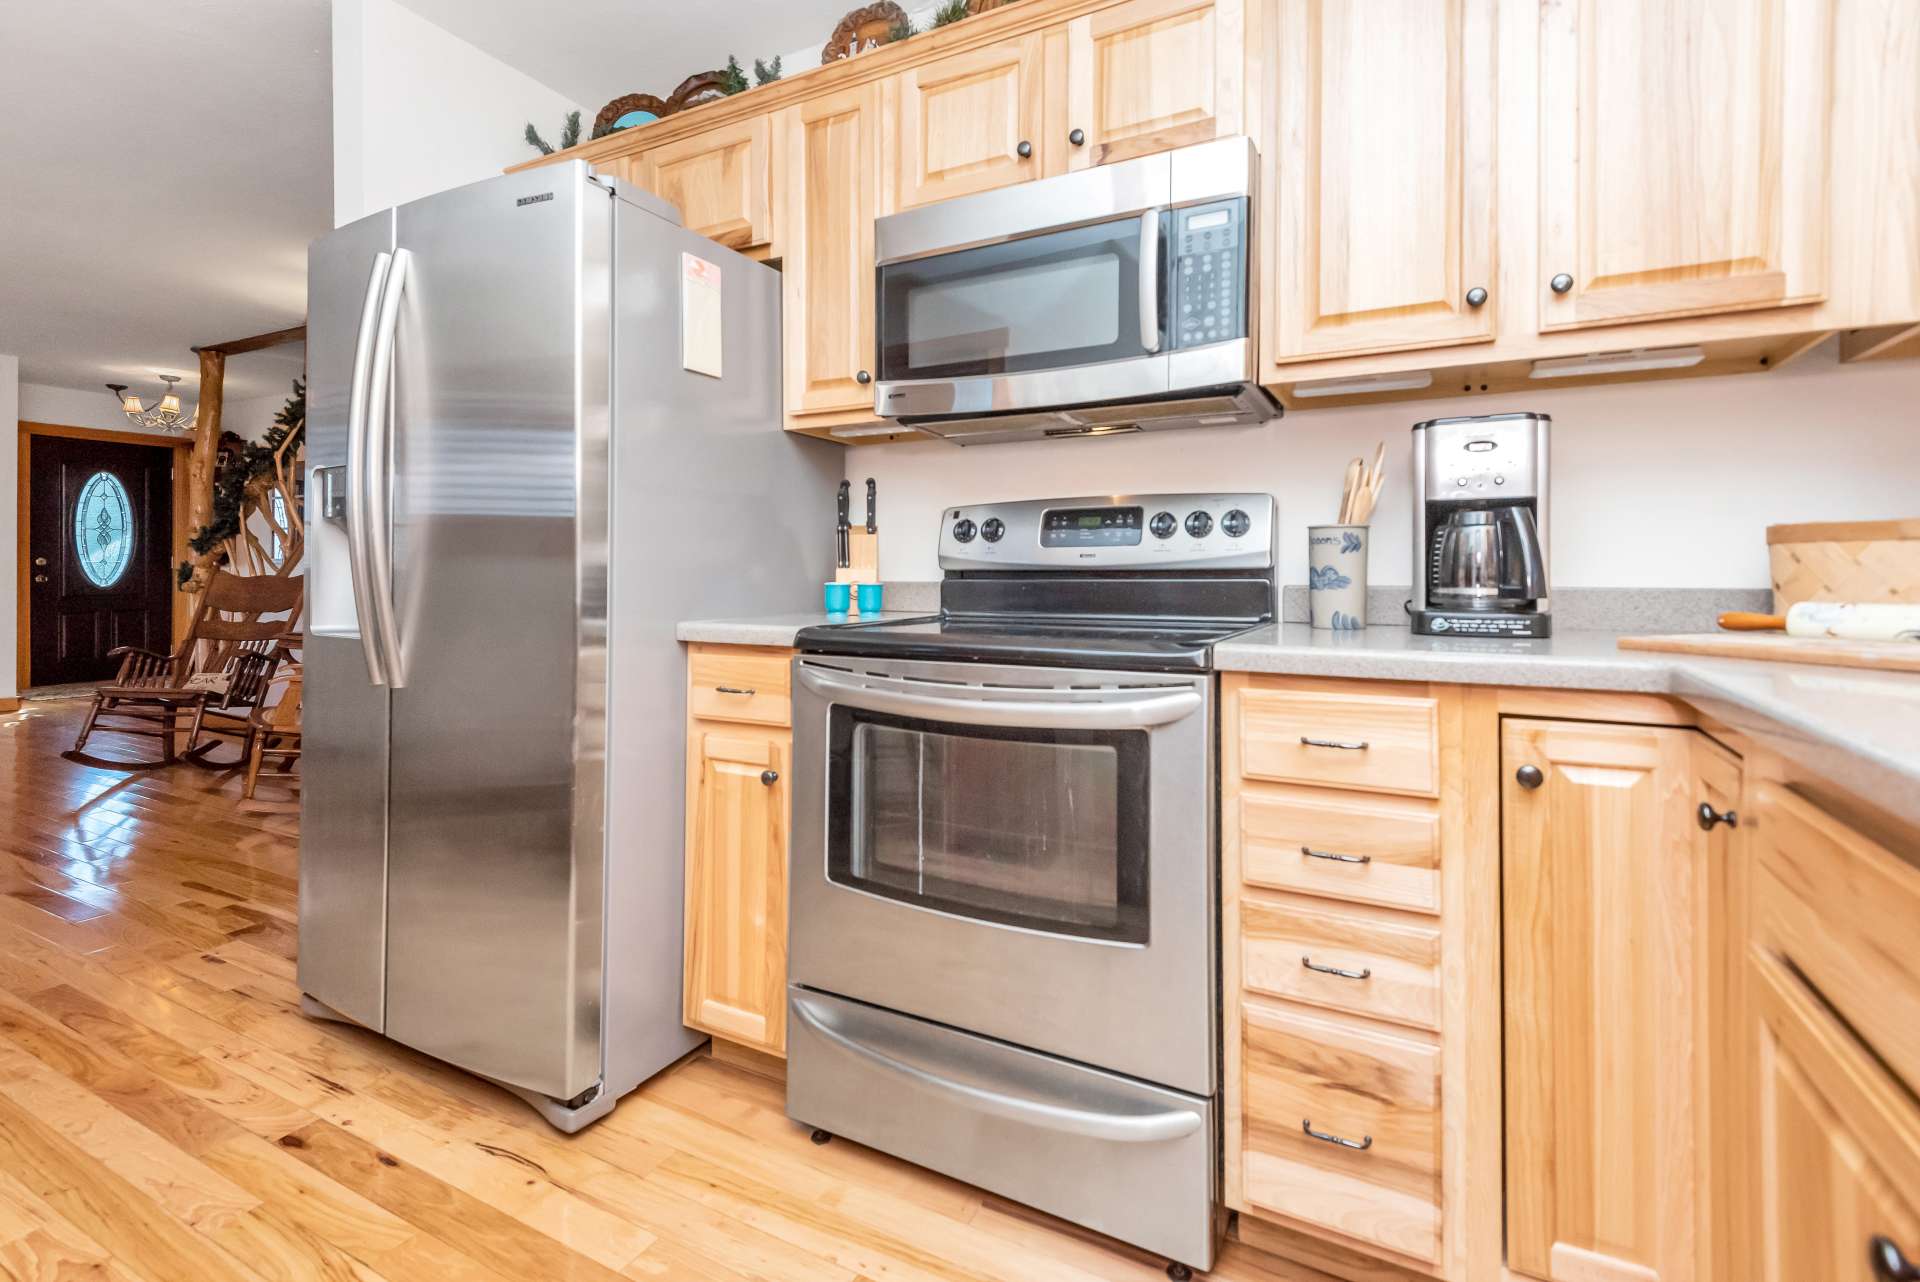 Stainless appliances and Corian counter tops.